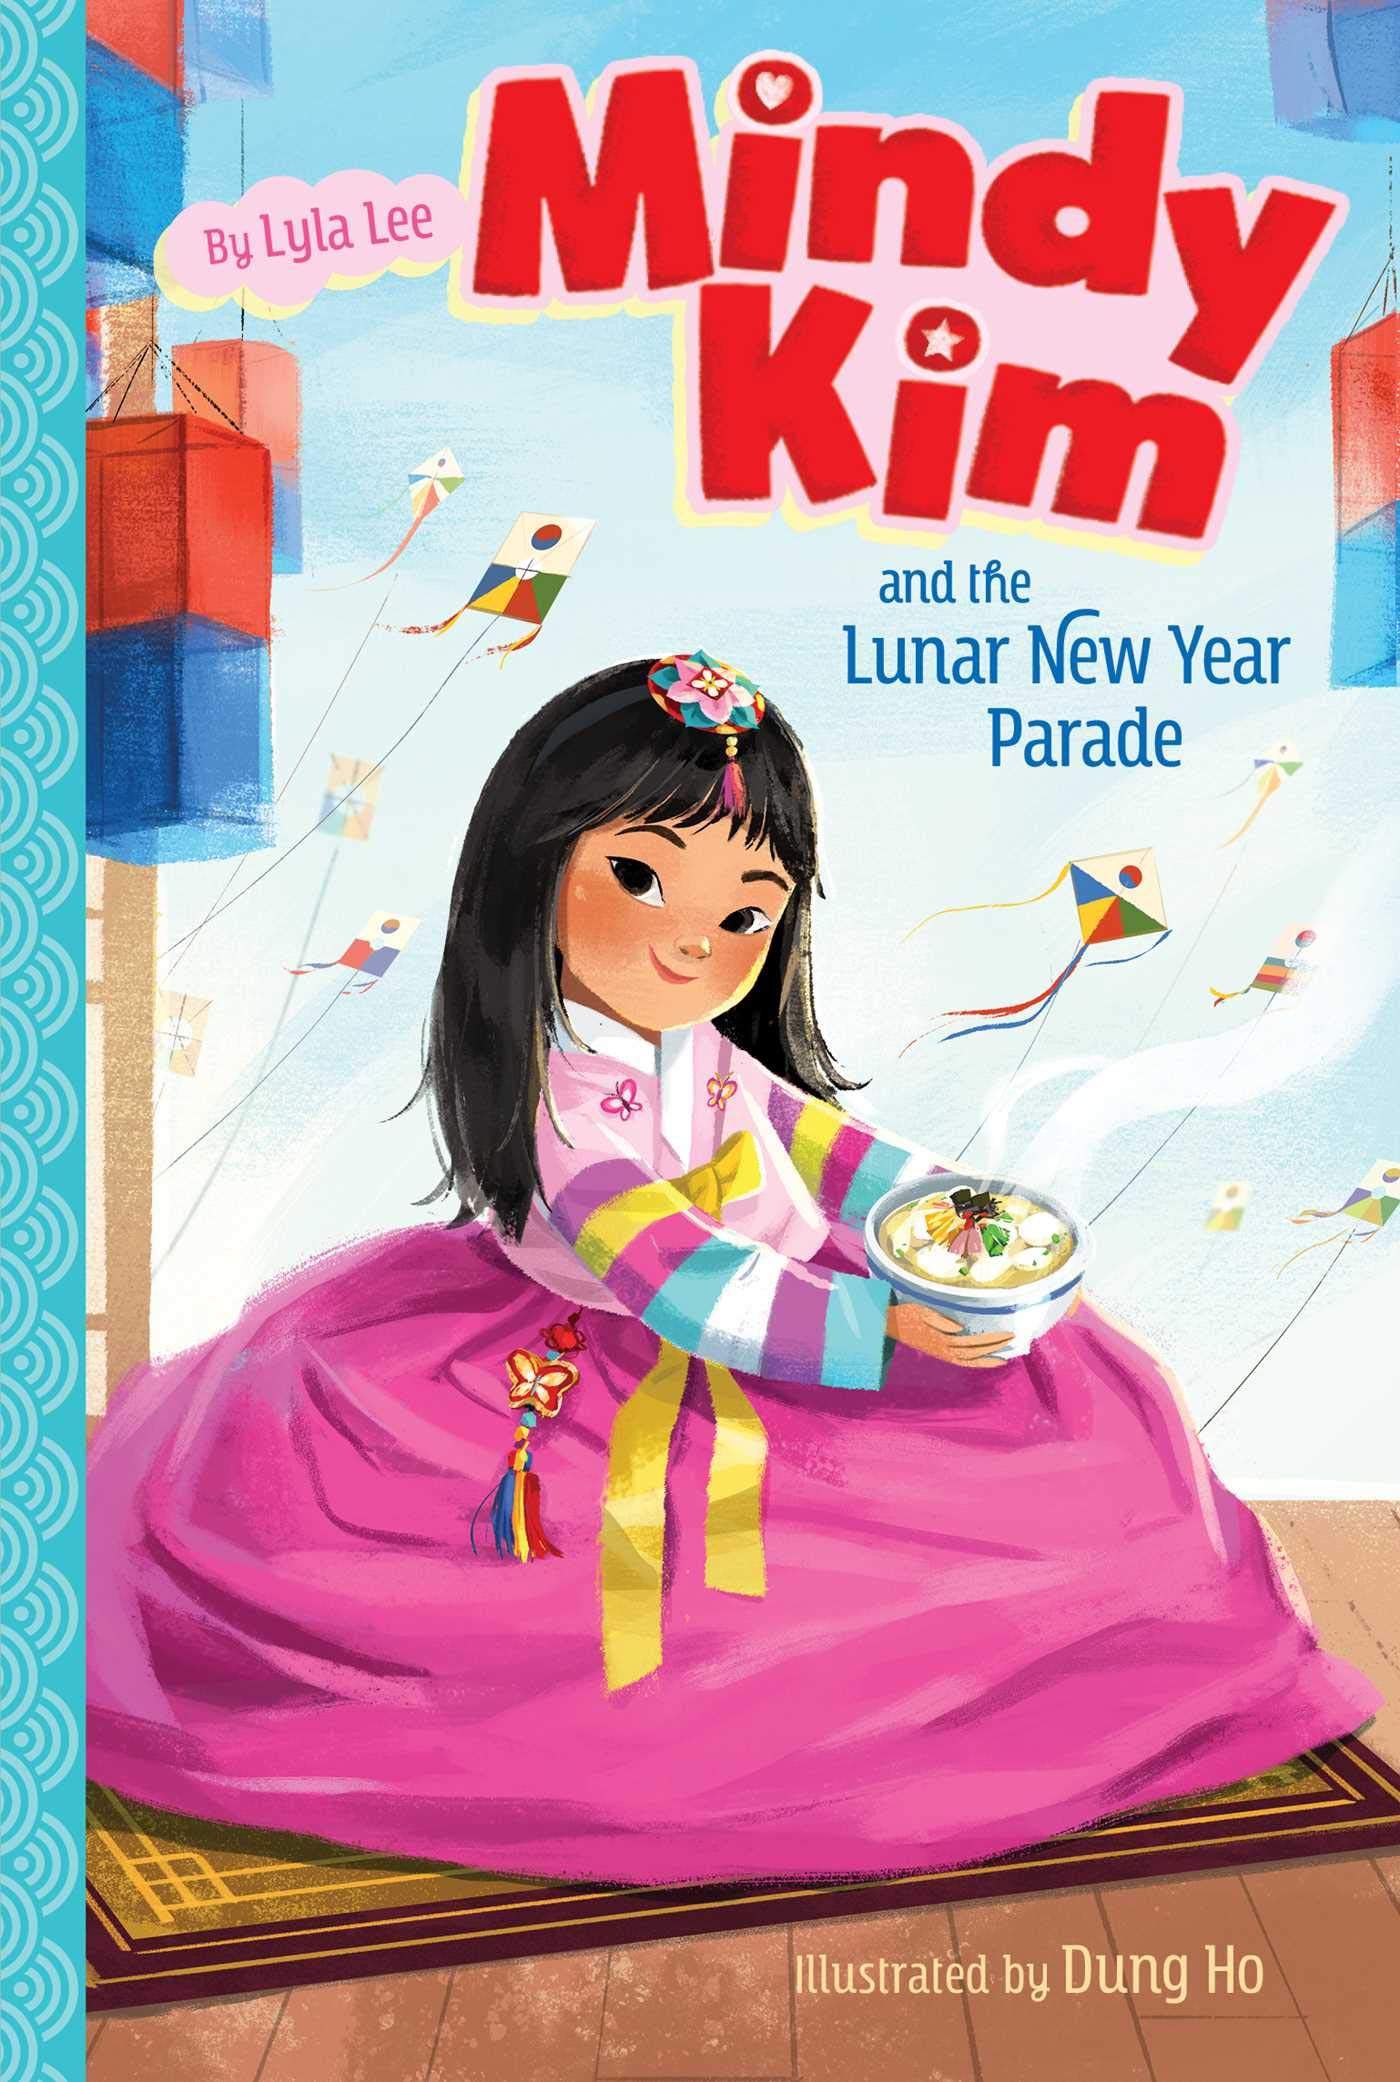 Book cover for "Mindy Kim and the Lunar New year Parade." A child holds a bowl of food while wearing a beautiful hanbok; kites fly in the sky in the background.